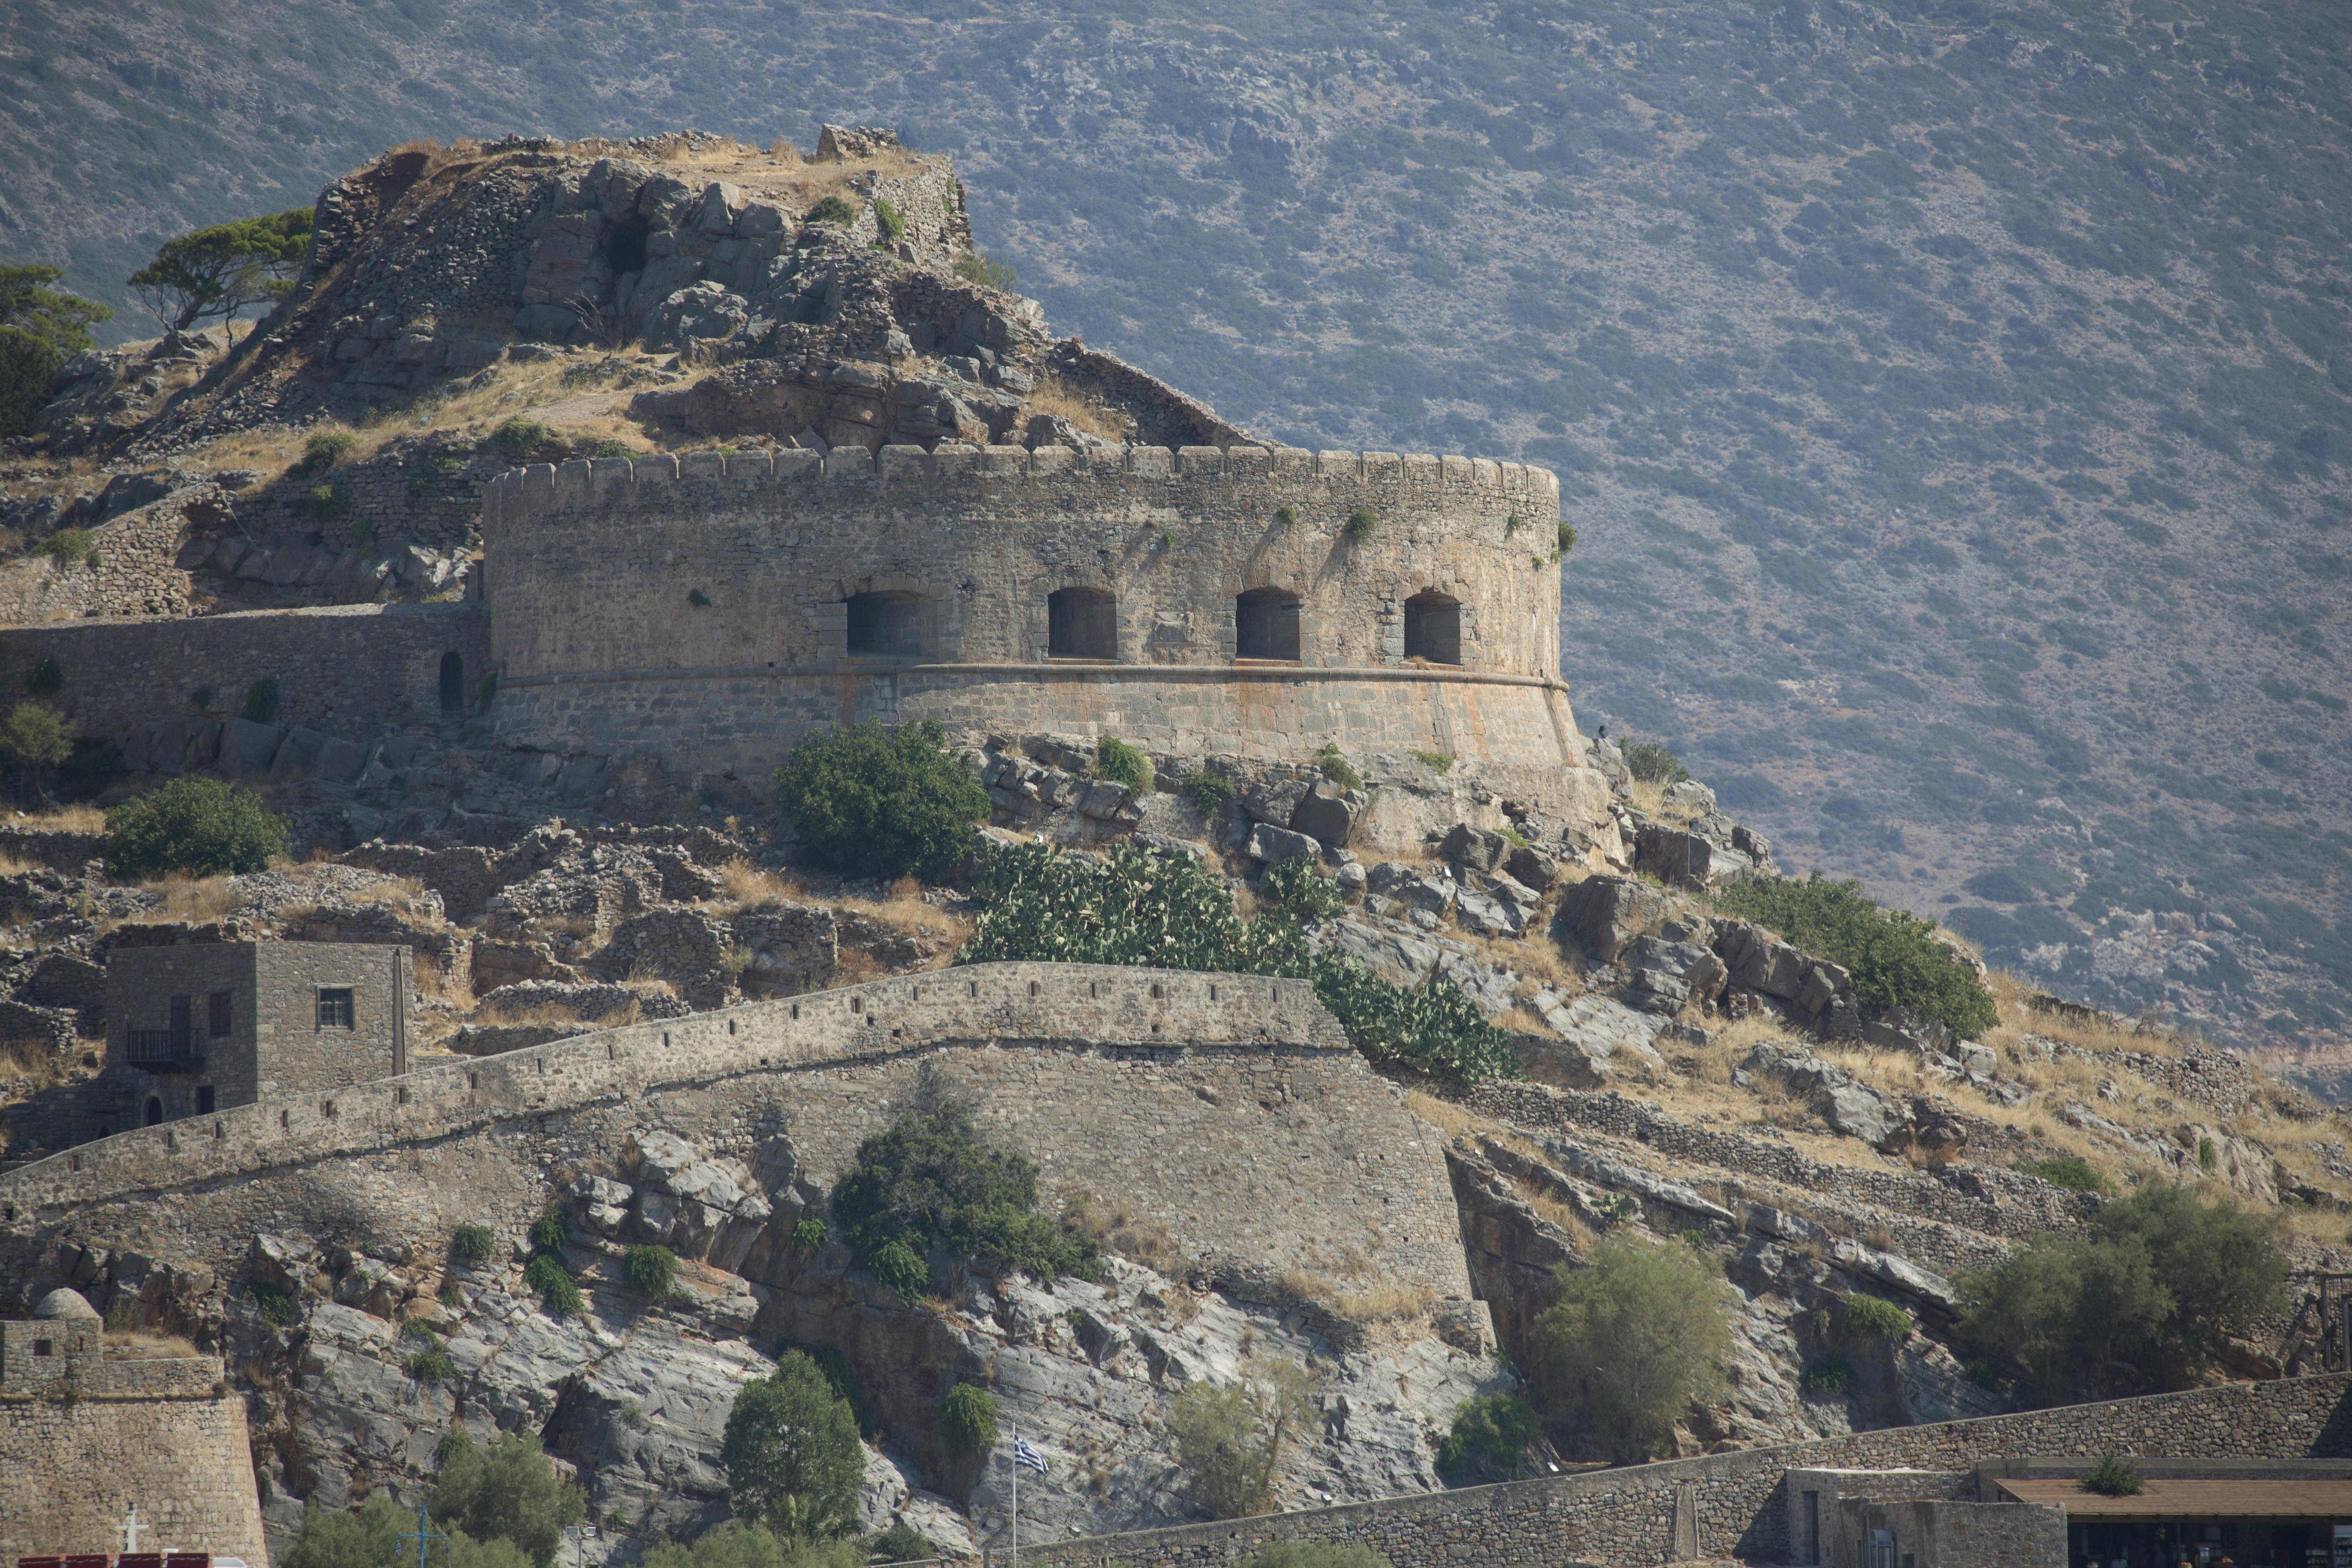 Spinalonga - ticket only